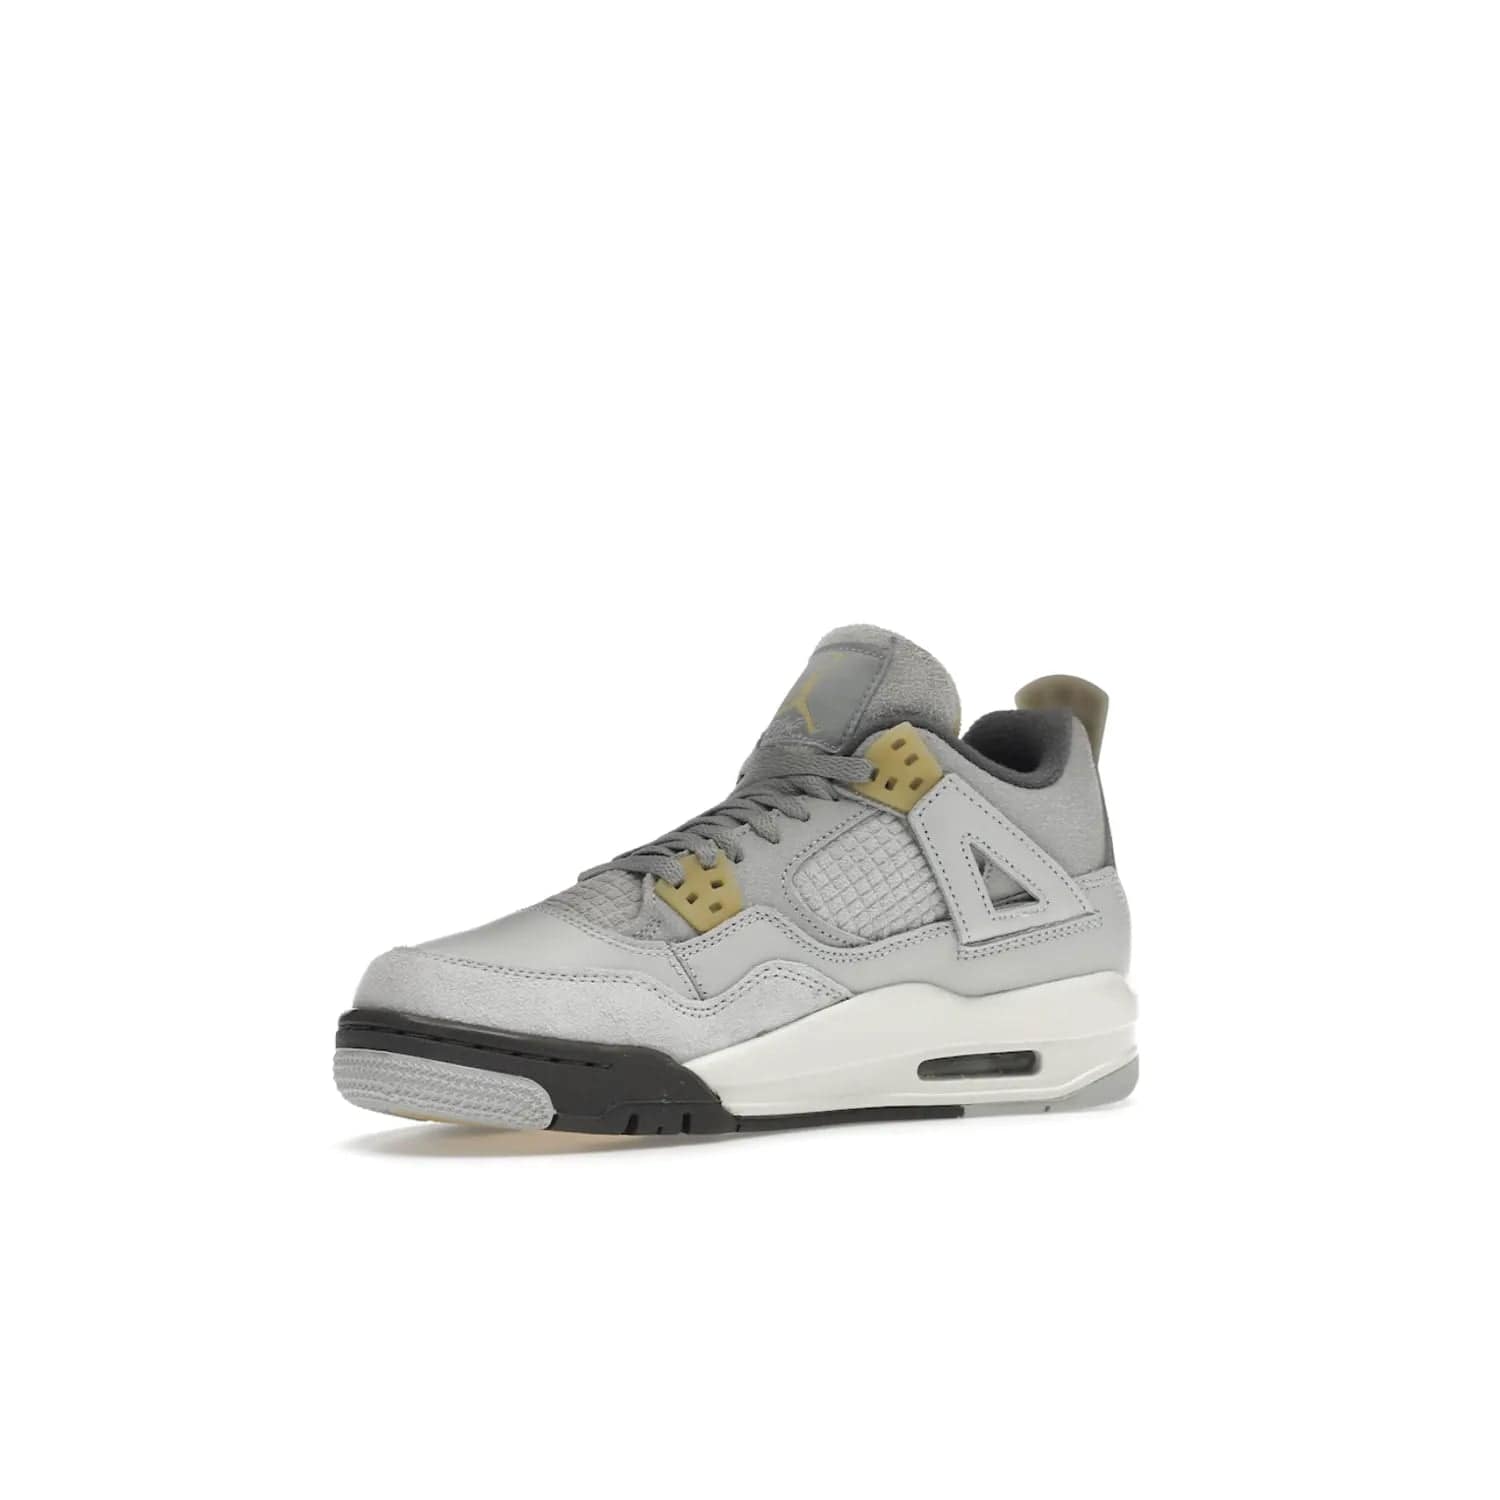 Jordan 4 Retro SE Craft Photon Dust (GS) - Image 16 - Only at www.BallersClubKickz.com - Shop the Jordan 4 Retro SE Craft Photon Dust (GS), the ultimate mix of style and comfort. With photonic dust, pale vanilla, off-white, grey fog, flat pewter and sail colorway, foam midsole, and rubber outsole, don't miss this special edition Jordan 4 releasing Feb 11, 2023.